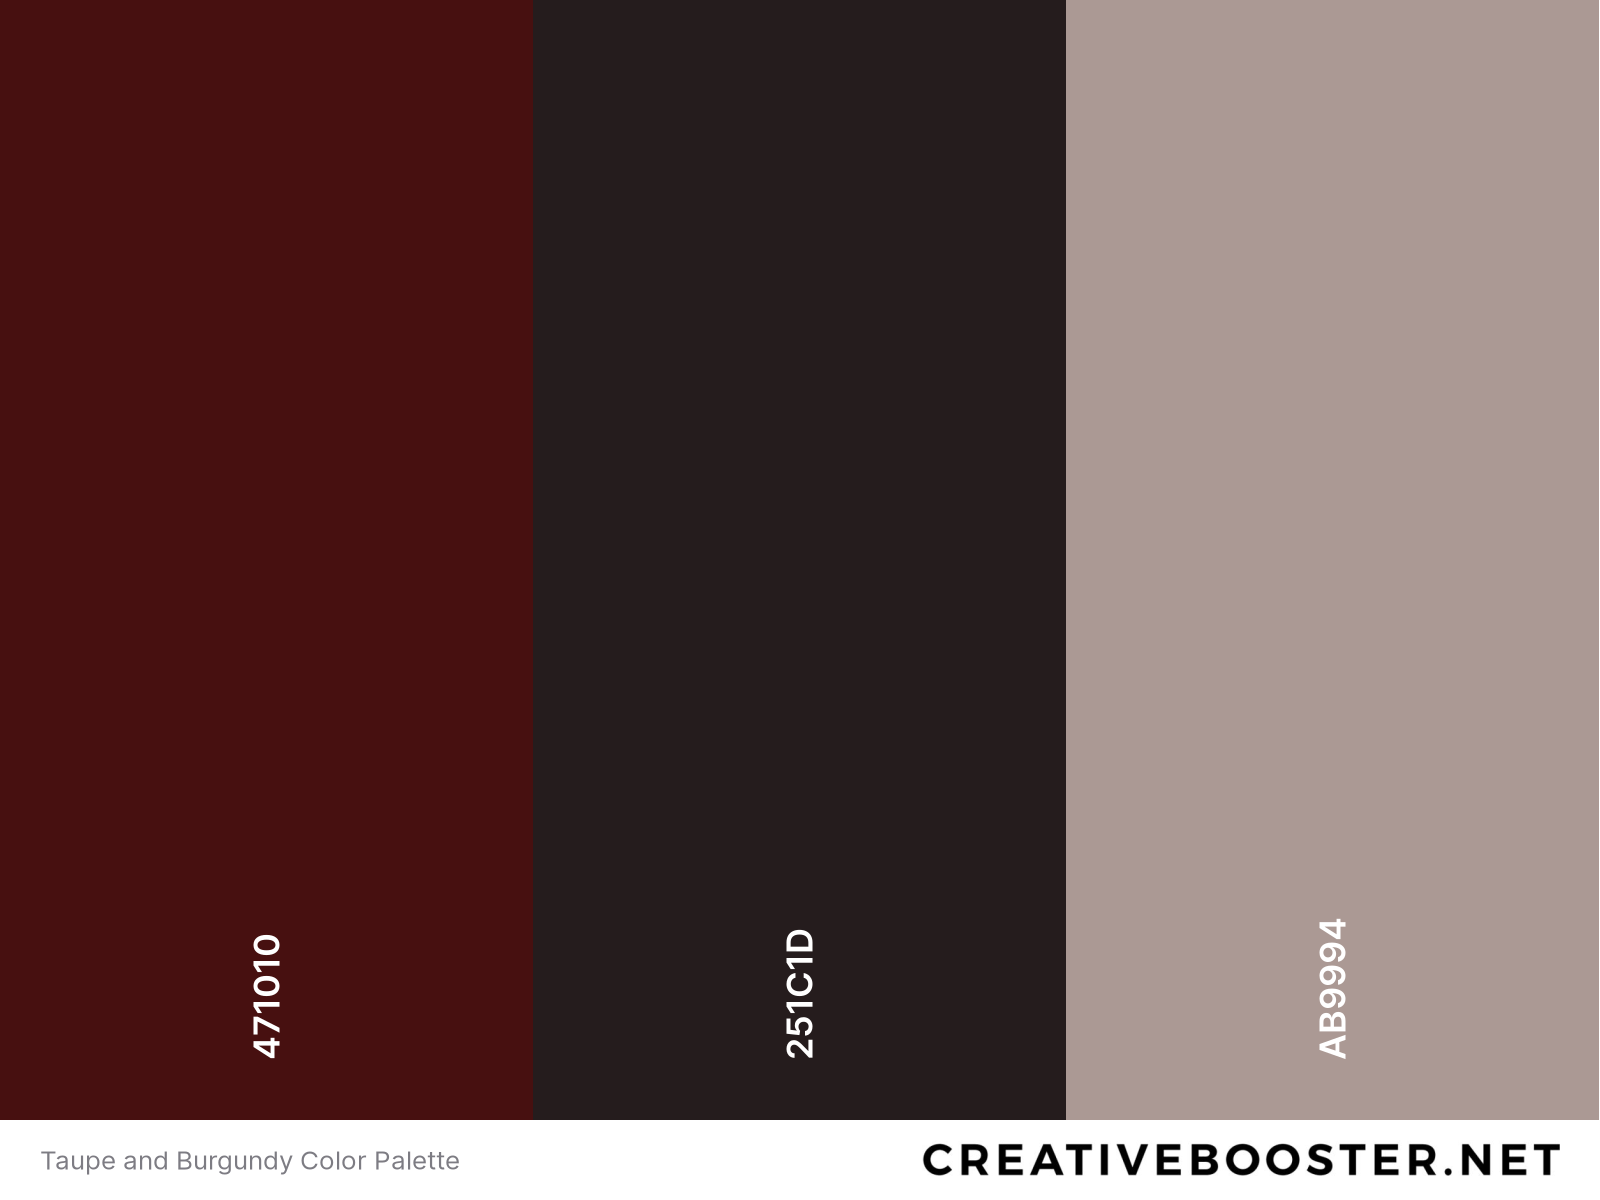 Taupe and Burgundy Color Palette